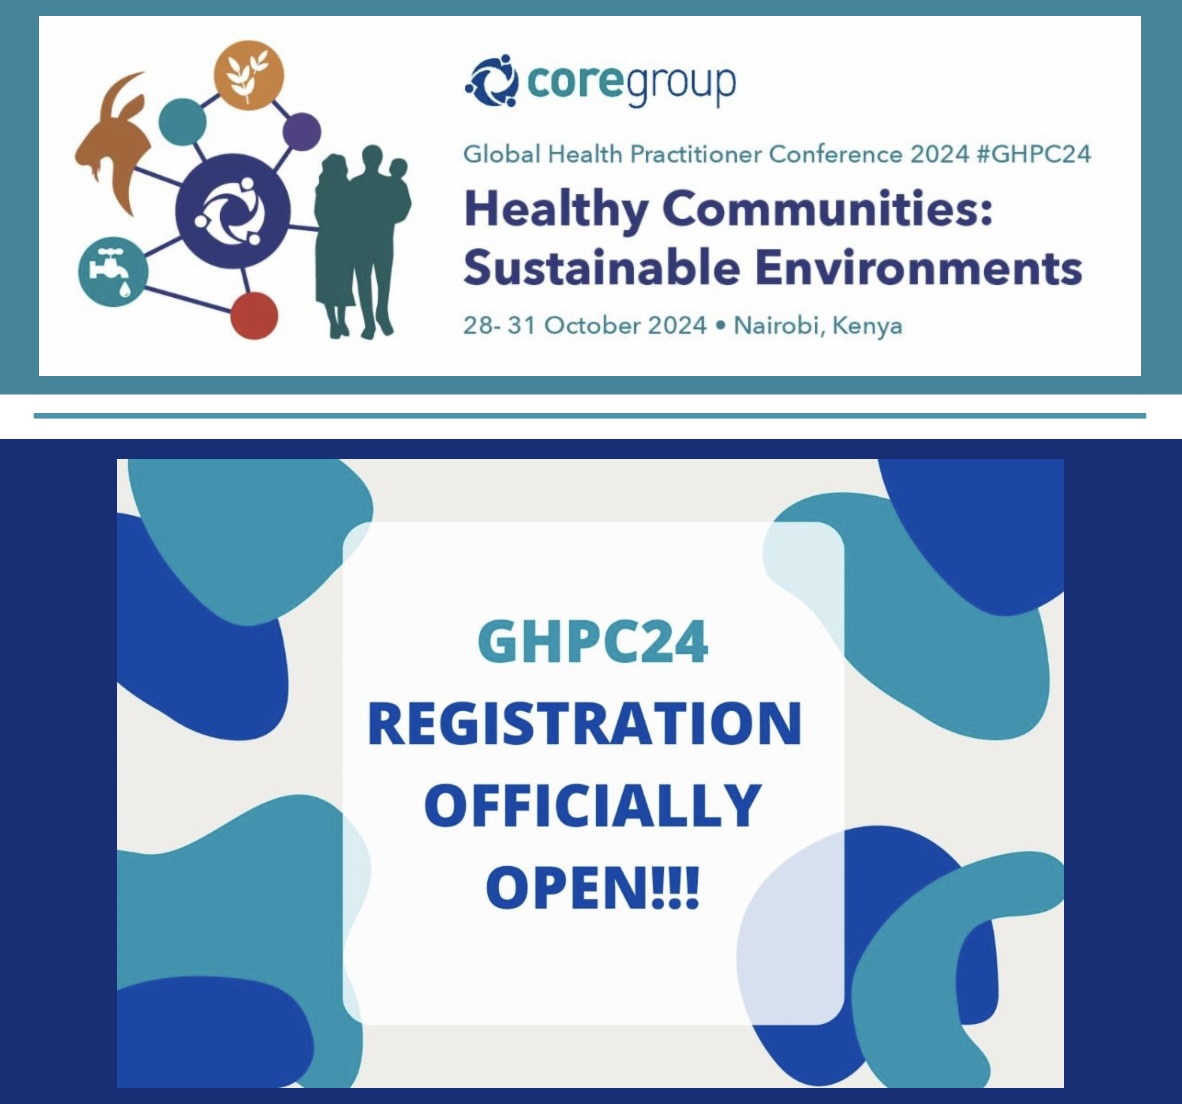 🎉 Registration's OPEN for GHPC 2024! Connect with global health leaders, researchers, practitioners worldwide. Dive into communities, climate, collaboration to improve health. Don't miss out! 🌍 #GHPC2024 Register here👉 ghpc24.dryfta.com